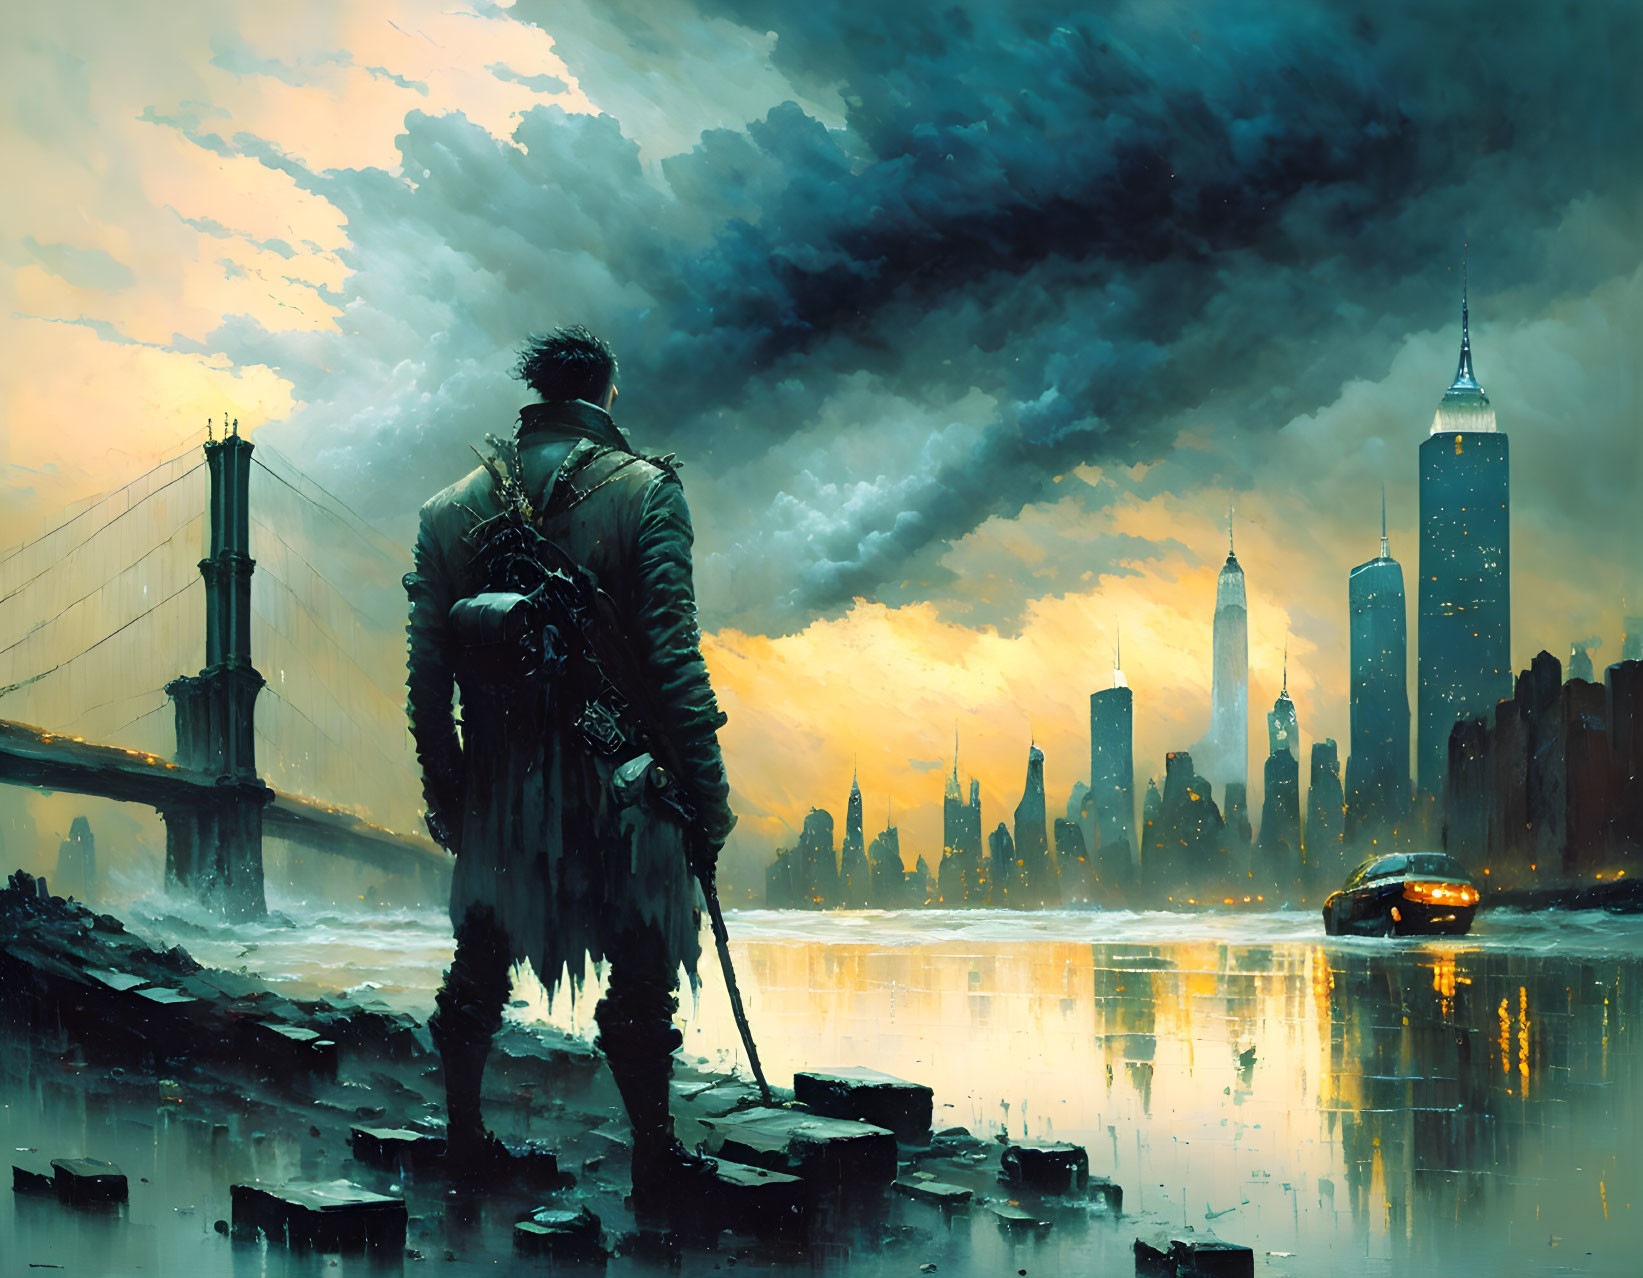 Figure in dystopian cityscape with dramatic sky, weapon, water, taxi, and rubble.